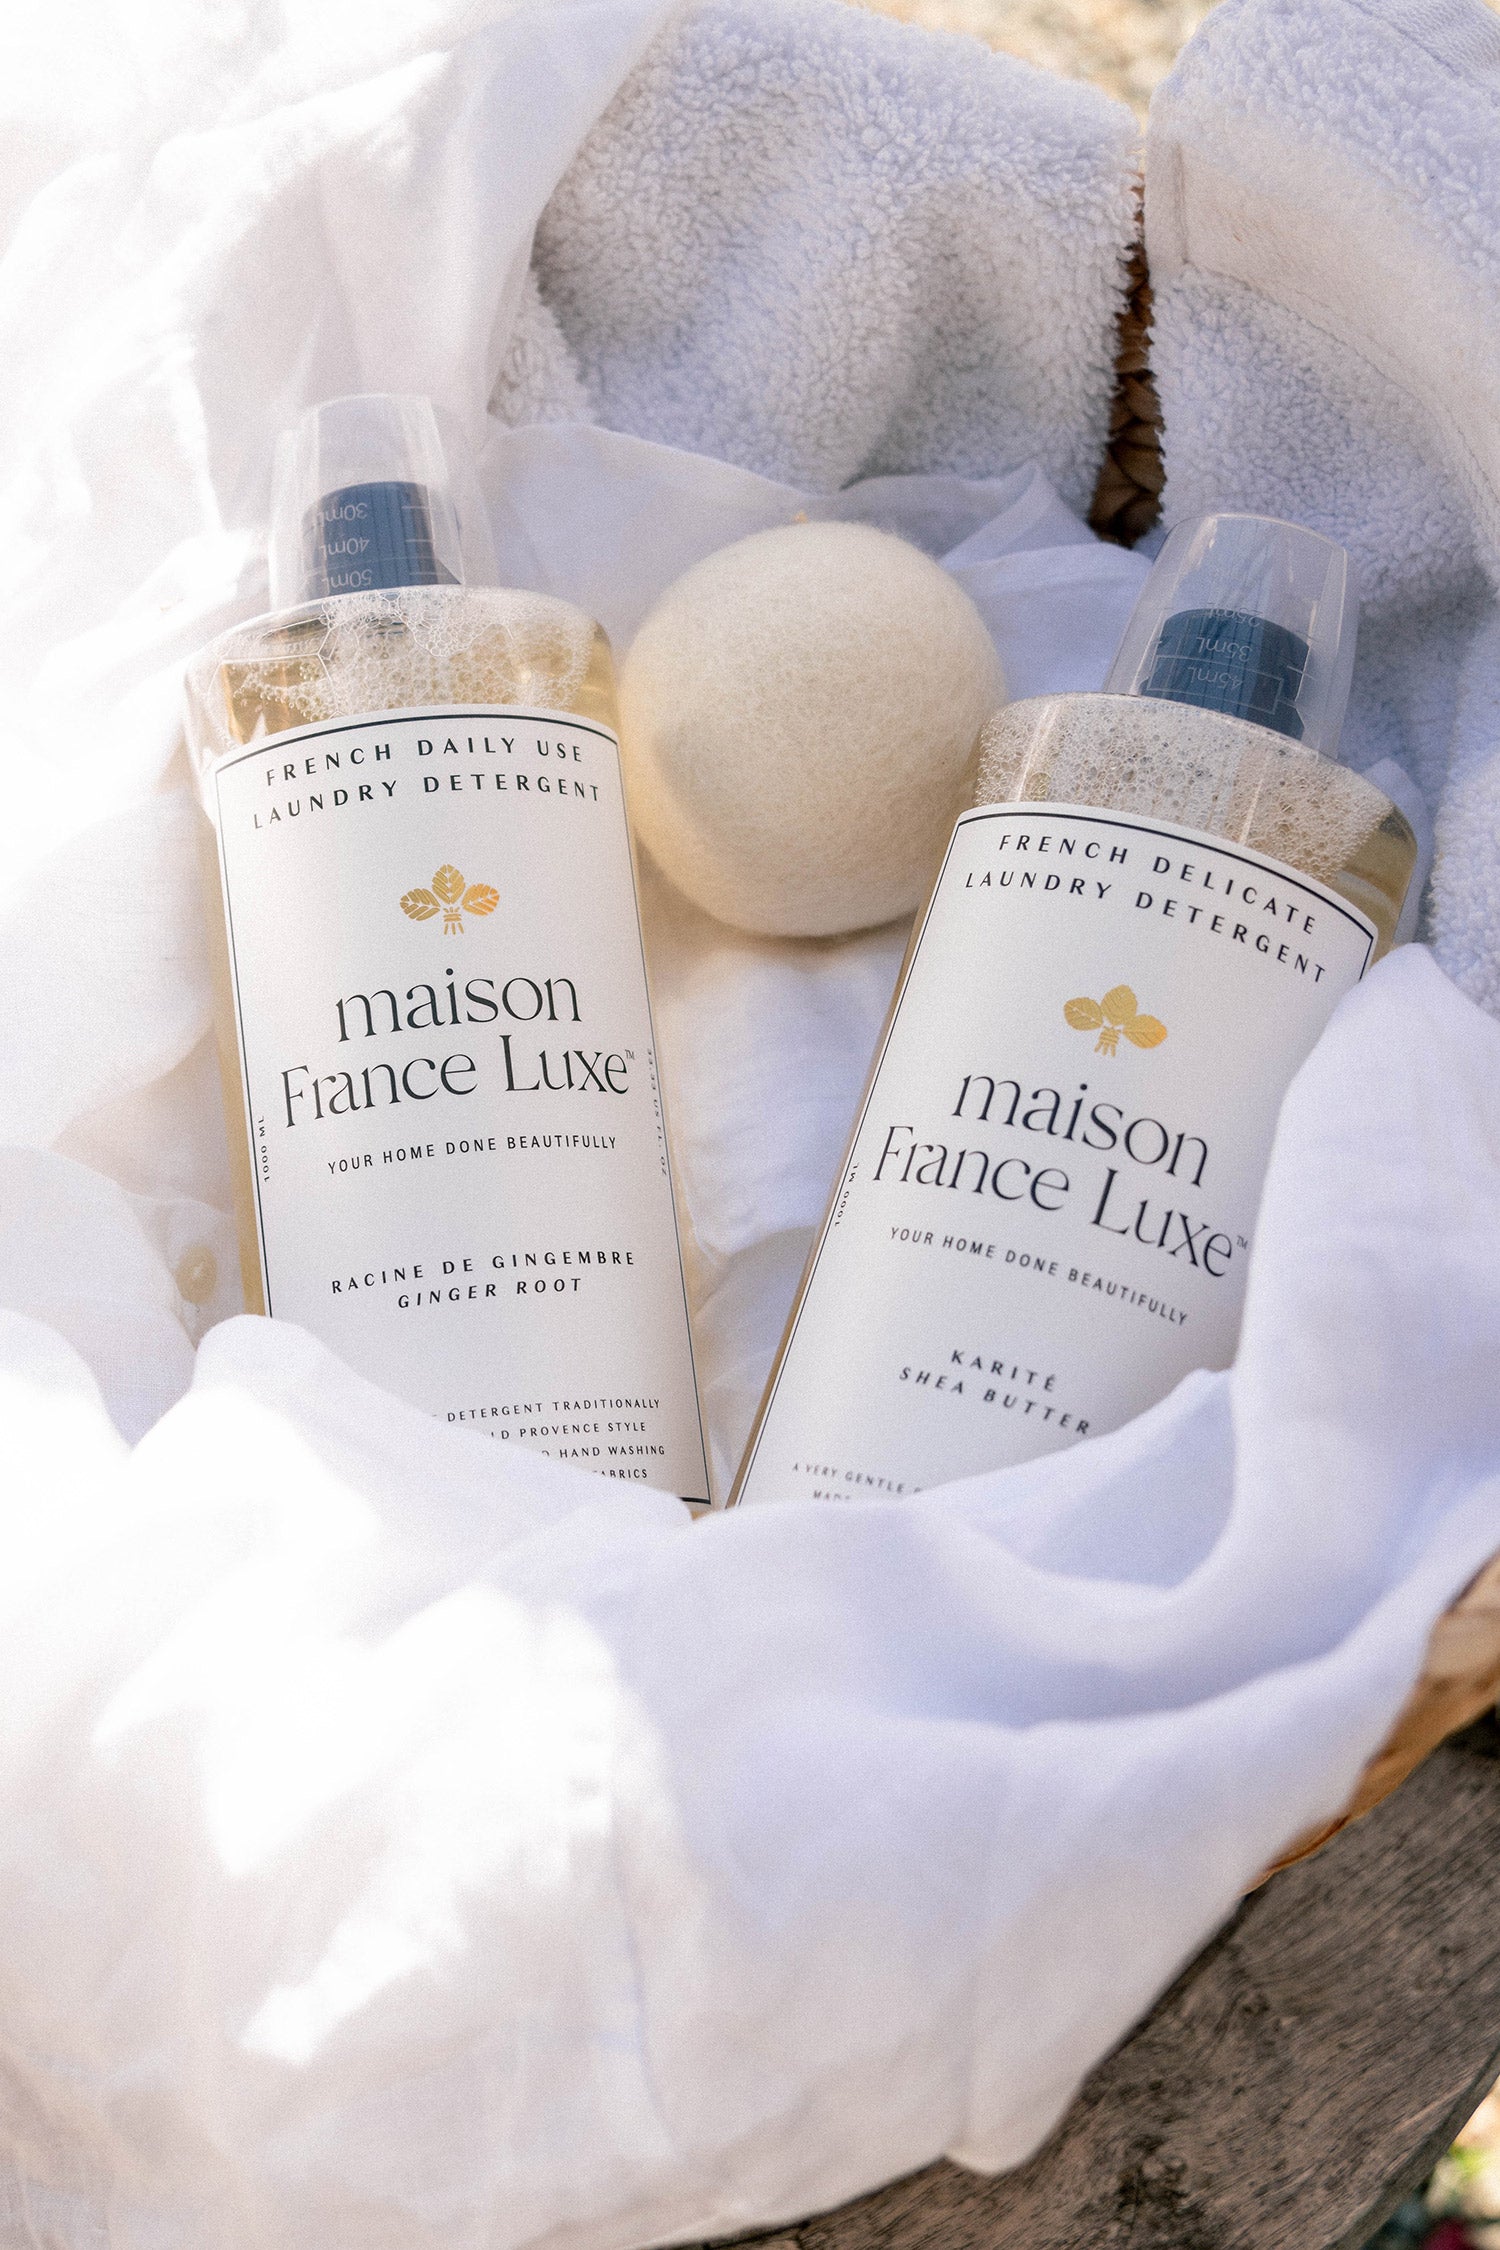 Natural, plant-based laundry detergent for everyday use and for delicate fabrics. Luxurious ginger root scent or delicate shea butter.